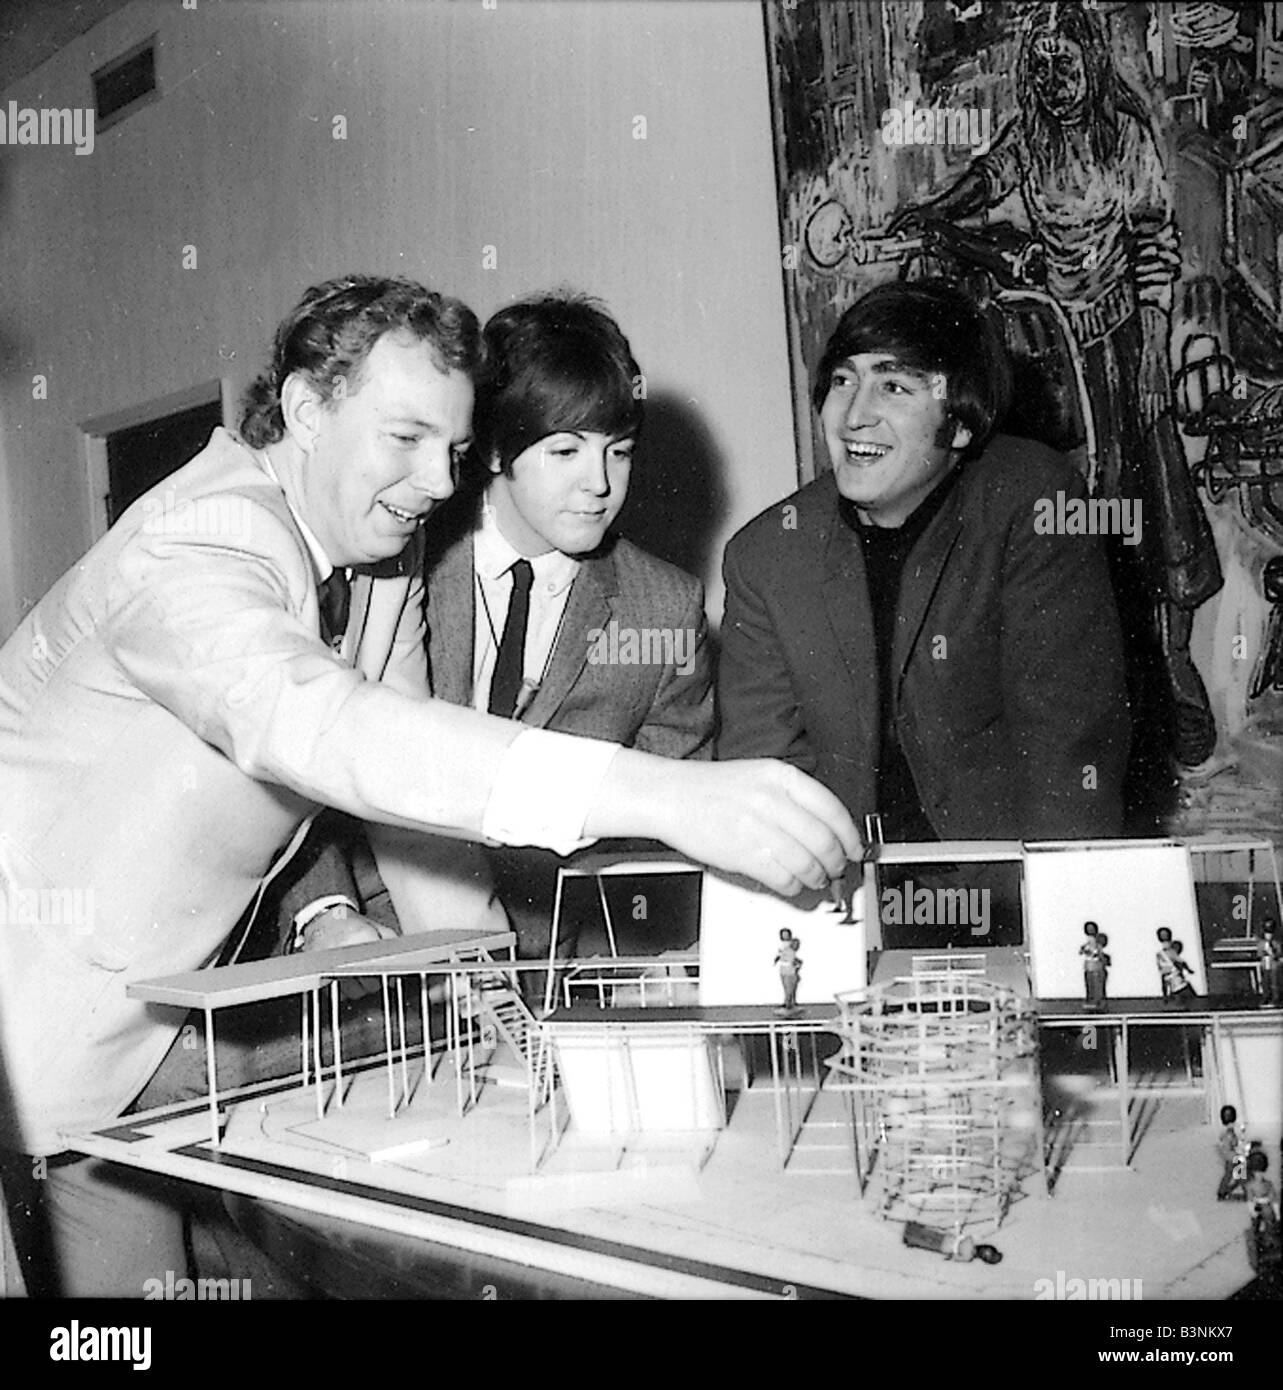 Beatles files 1965 John Lennon Paul McCartney is shown on the stage set of a new show with toy soldiers to aid with designer Stock Photo